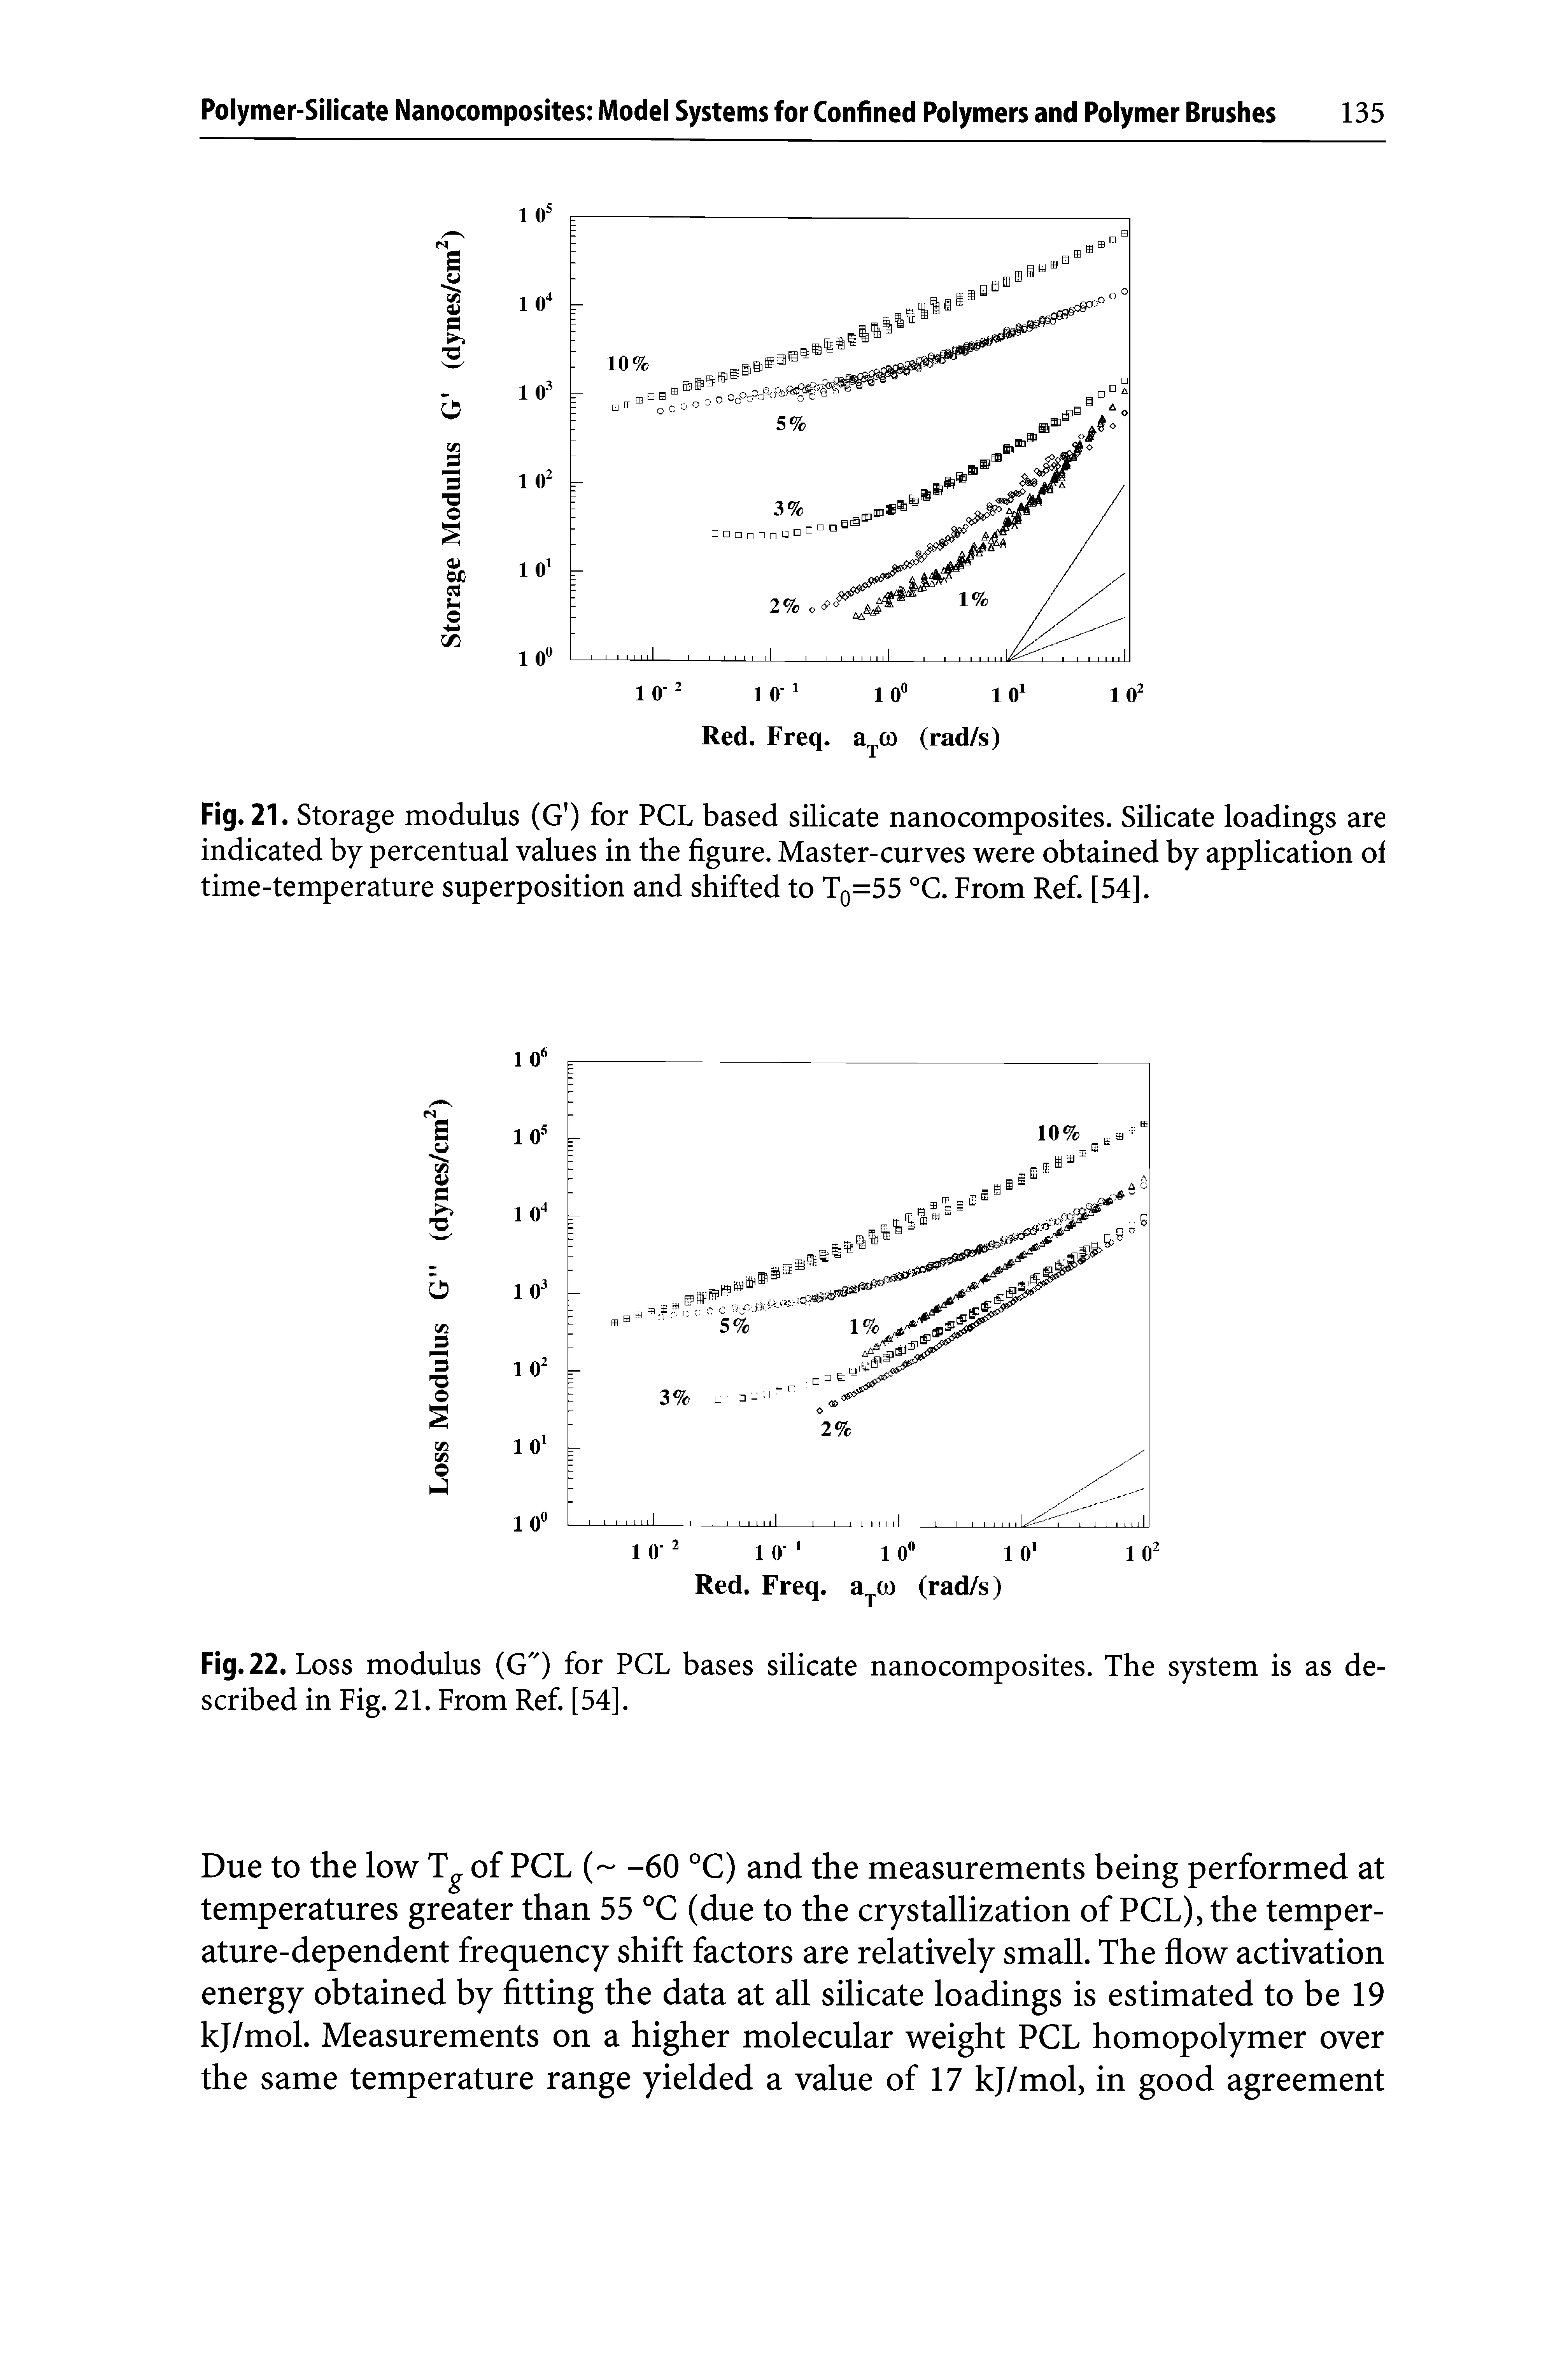 Fig. 21. Storage modulus (G ) for PCL based silicate nanocomposites. Silicate loadings are indicated by percentual values in the figure. Master-curves were obtained by application of time-temperature superposition and shifted to T0=55 °C. From Ref. [54].